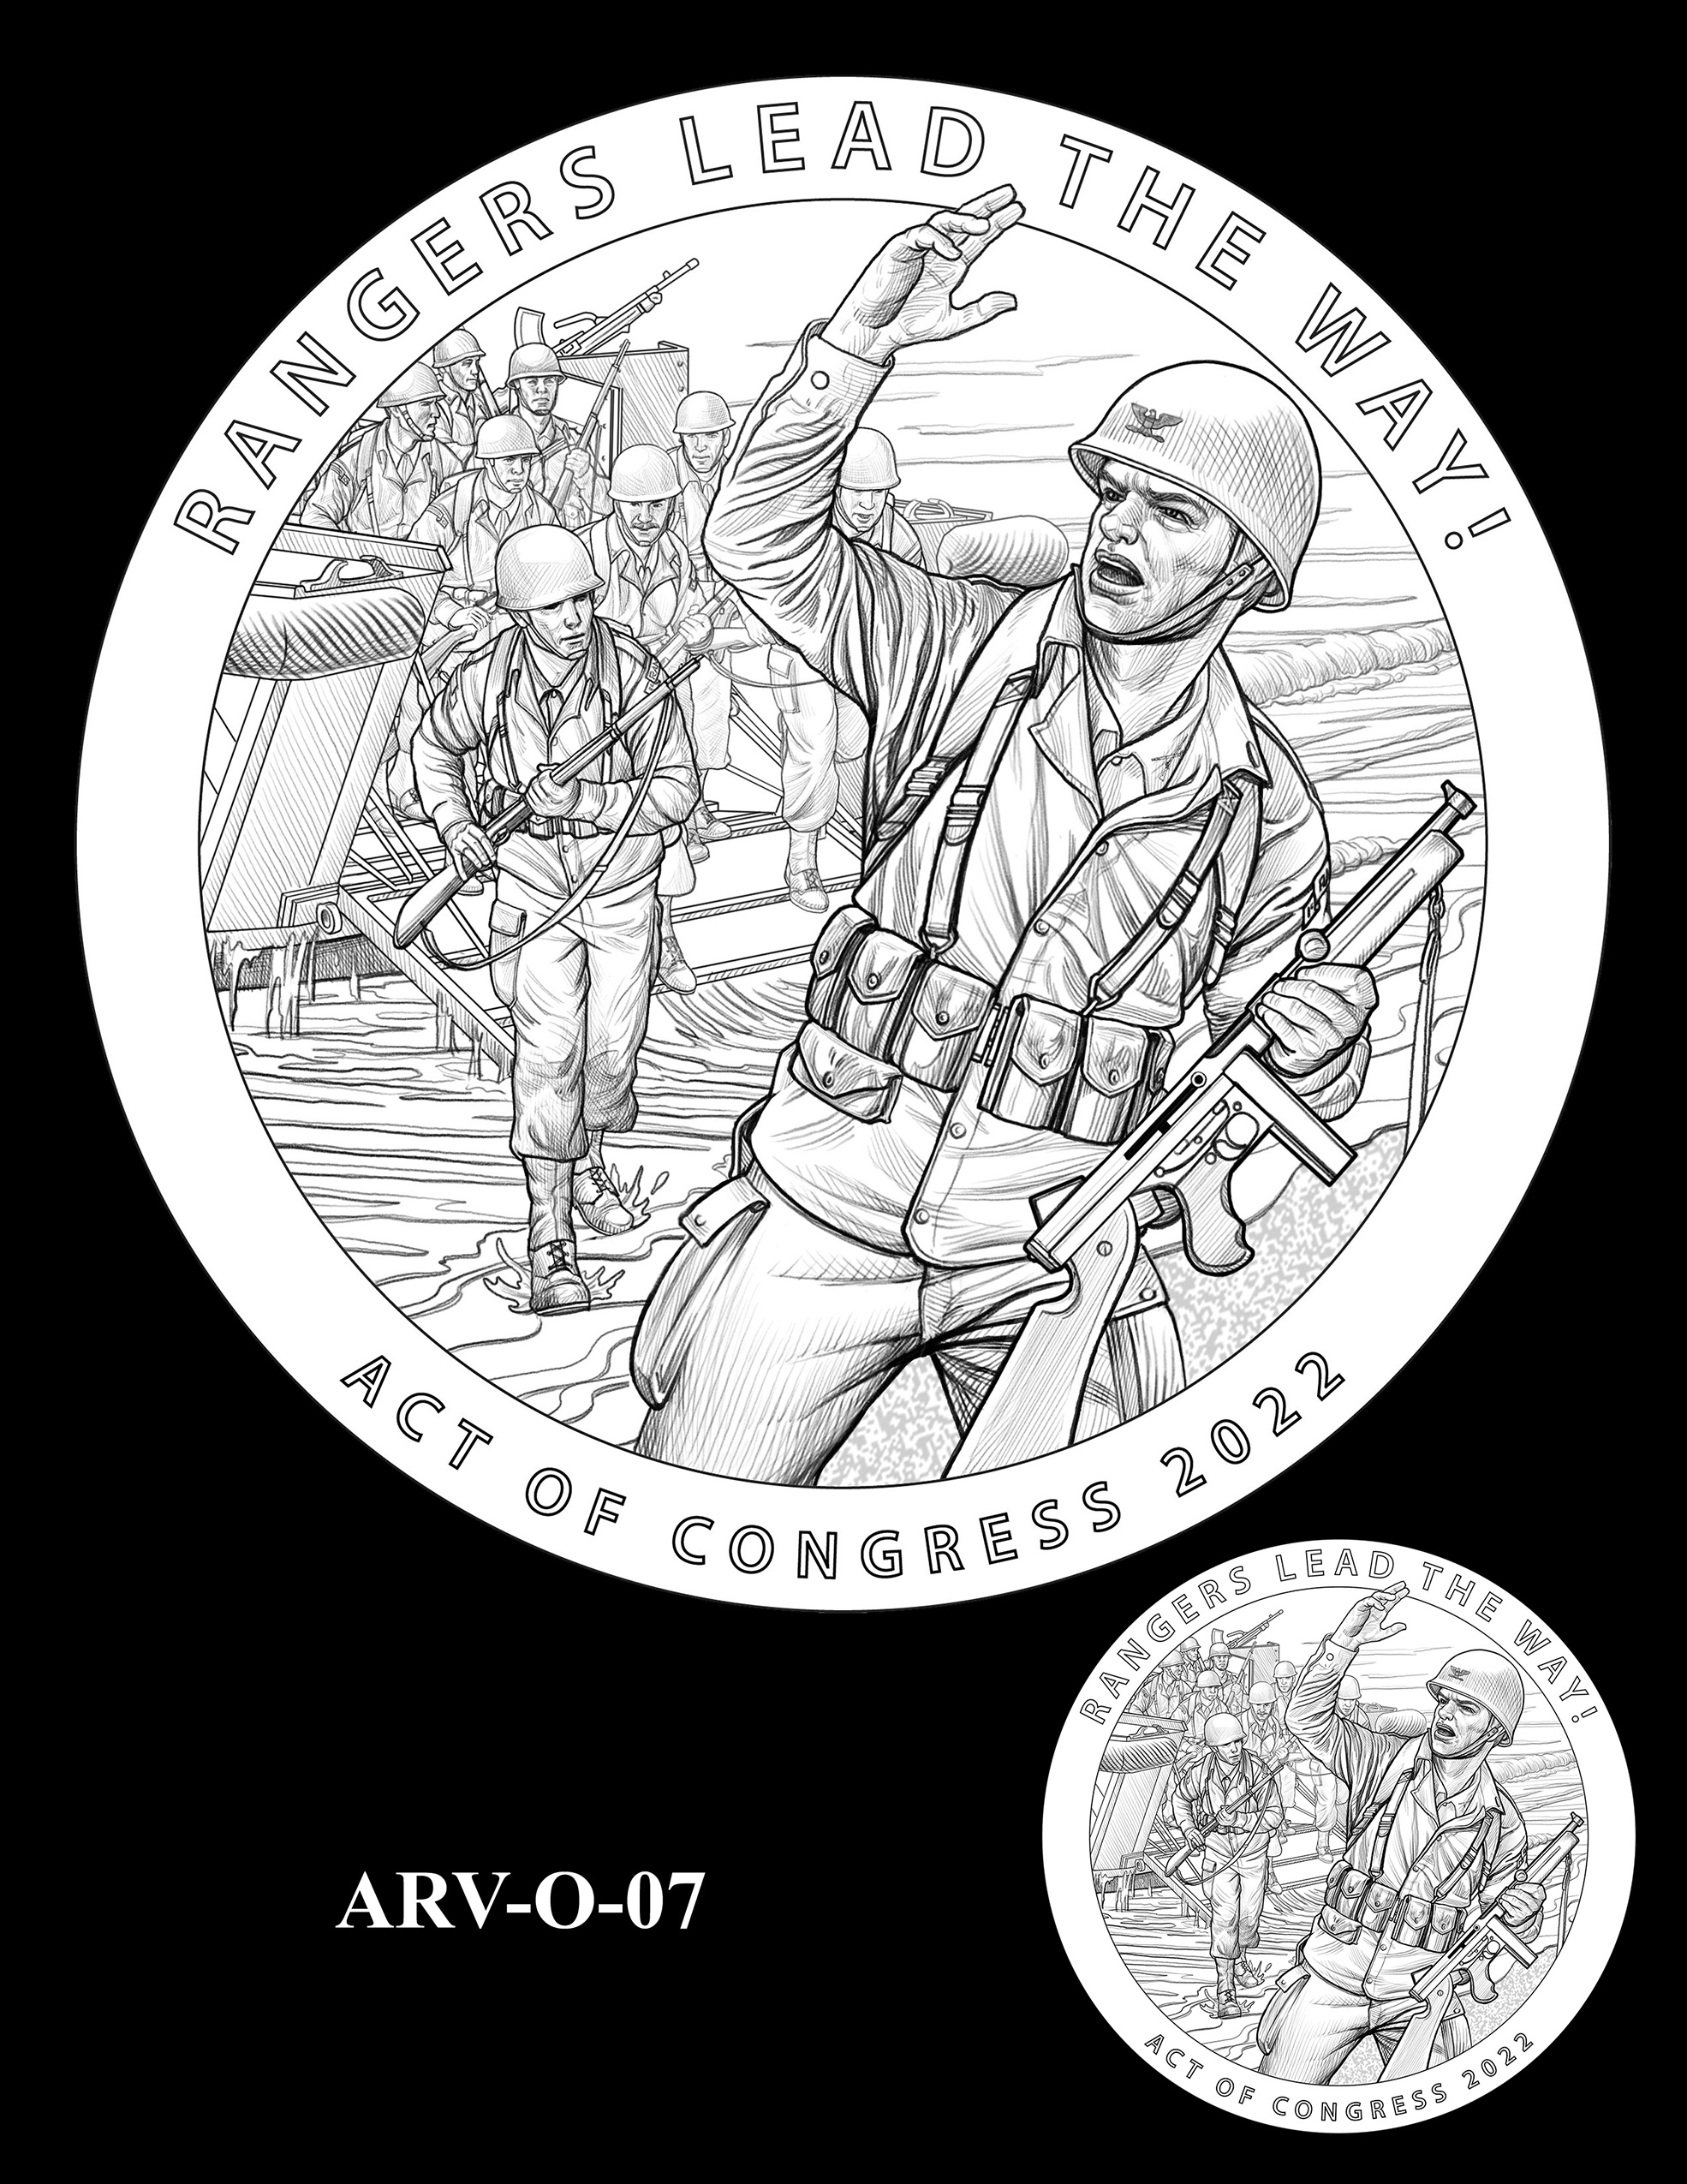 ARV-O-07 -- Army Ranger Veterans of WWII Congressional Gold Medal